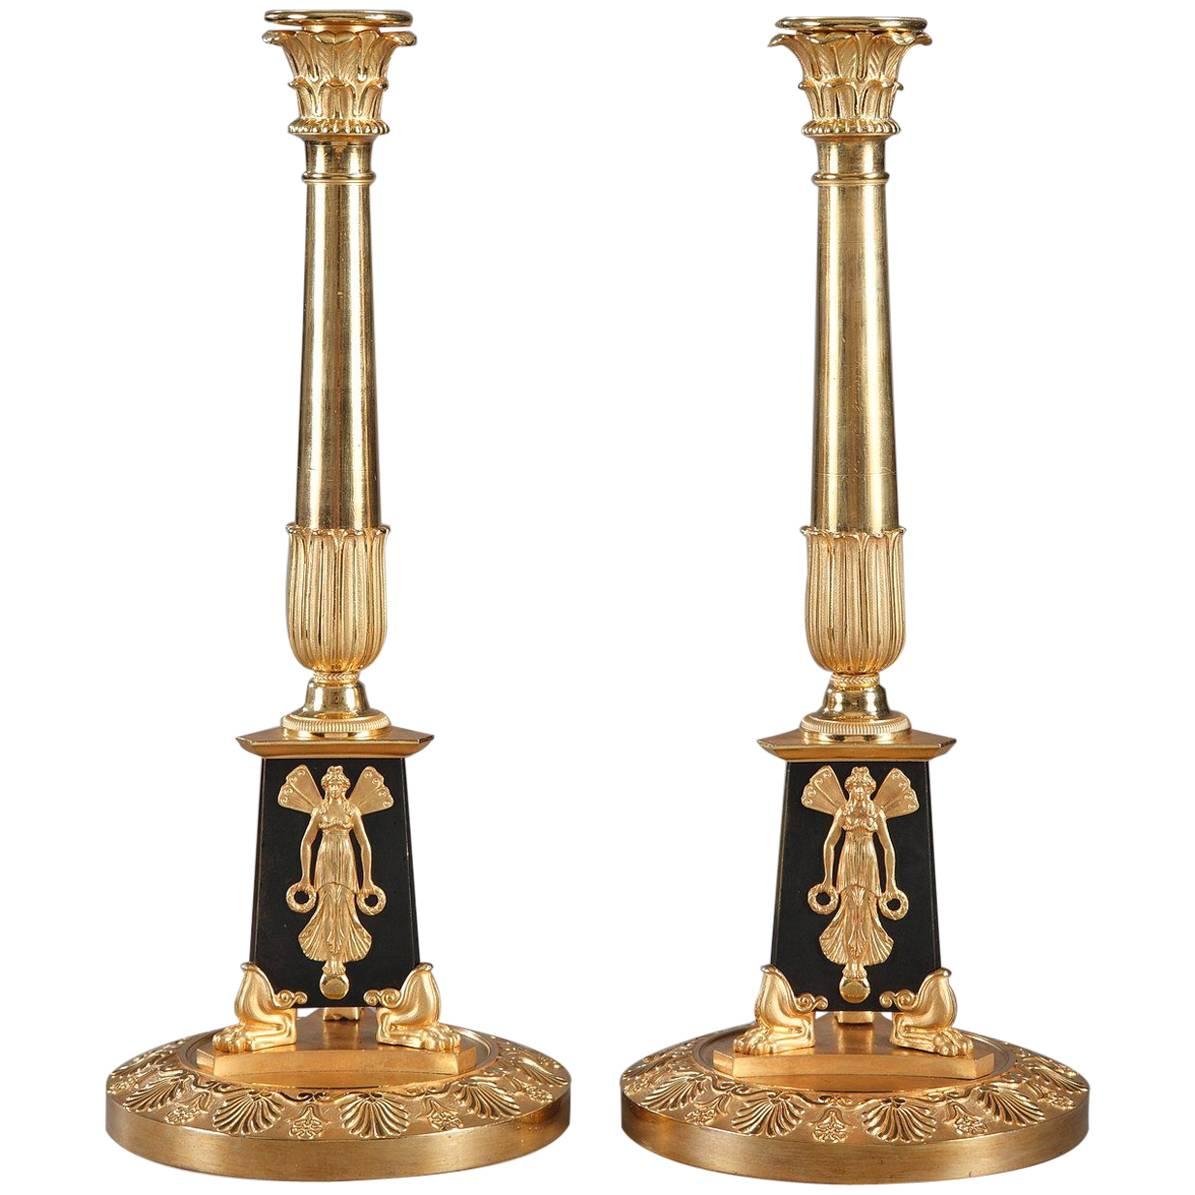 Pair of Empire Candlesticks with Allegories of Victory